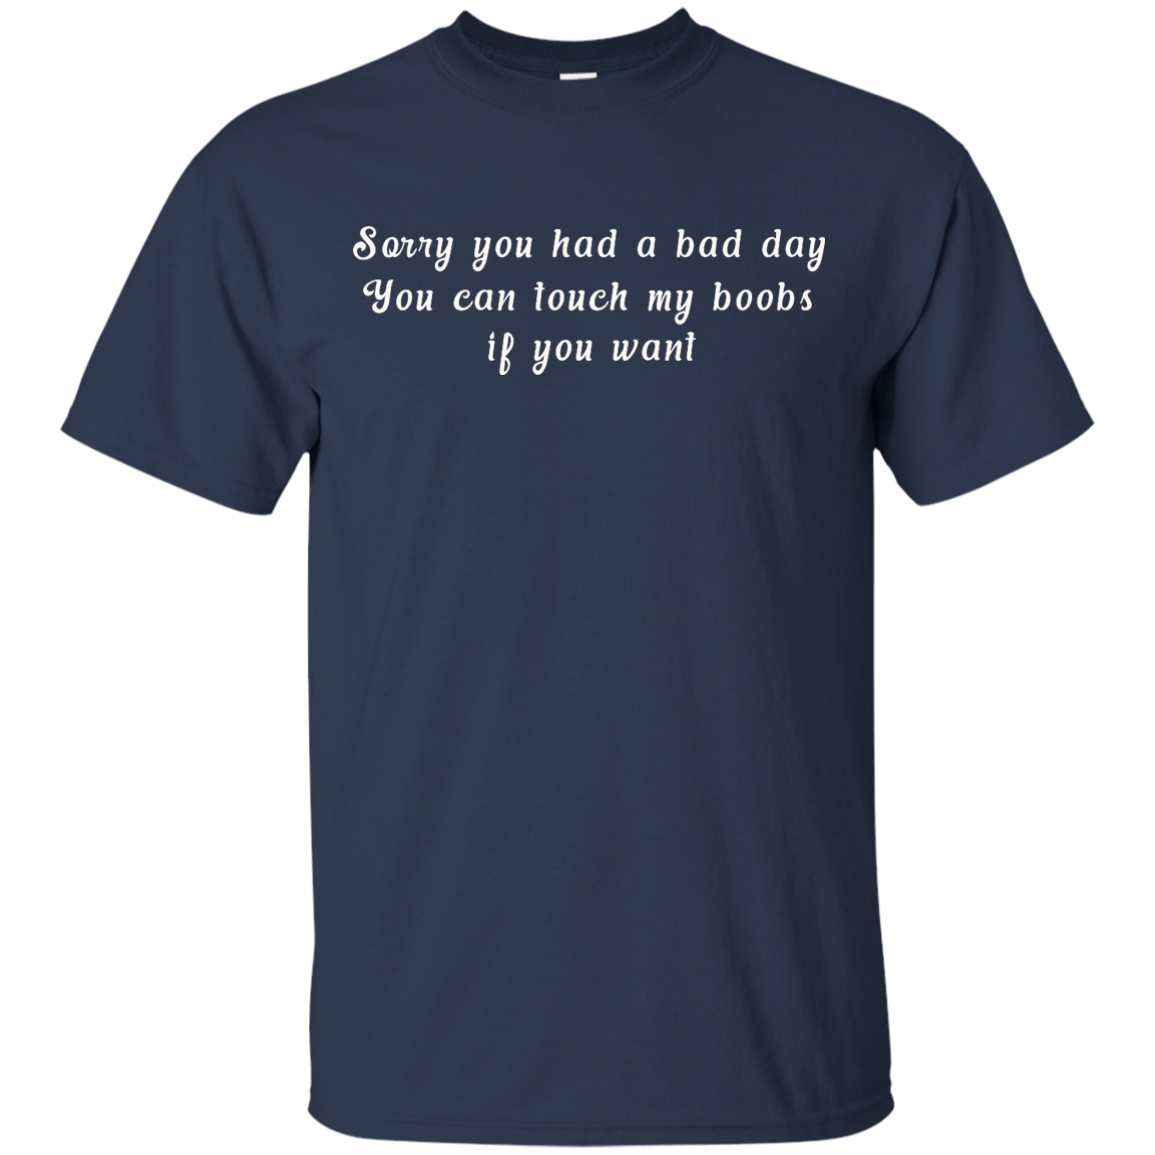 Sorry you had a bad day shirt, tank, racerback